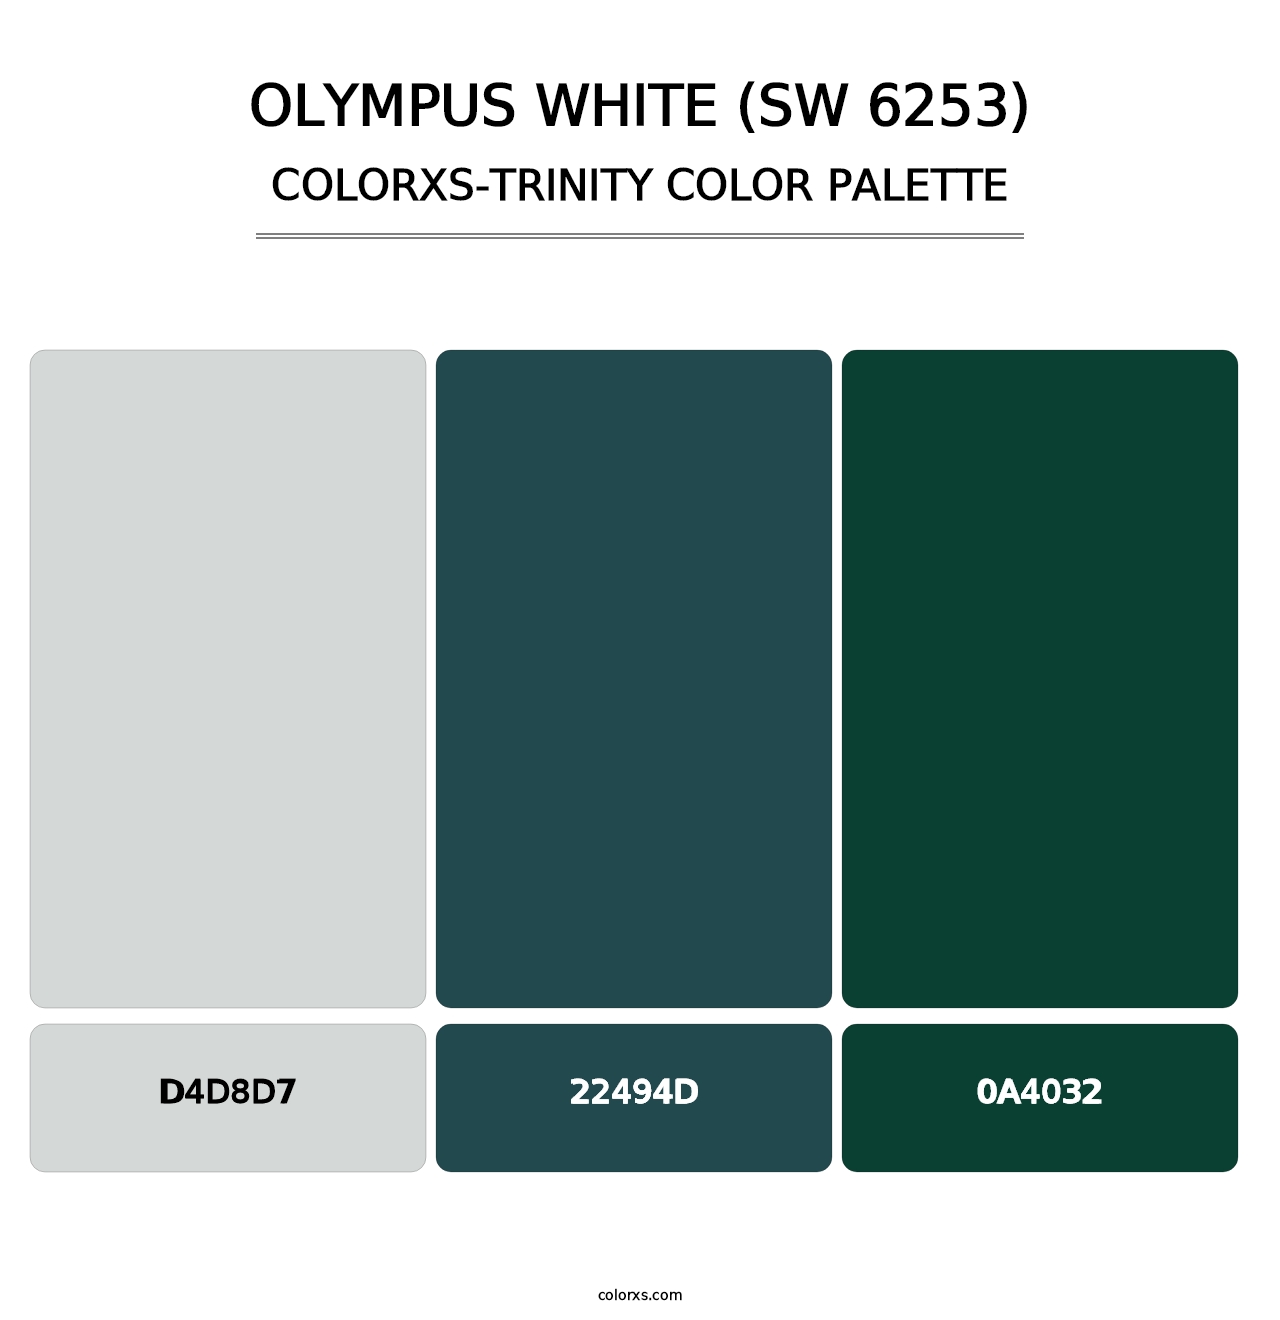 Olympus White (SW 6253) - Colorxs Trinity Palette